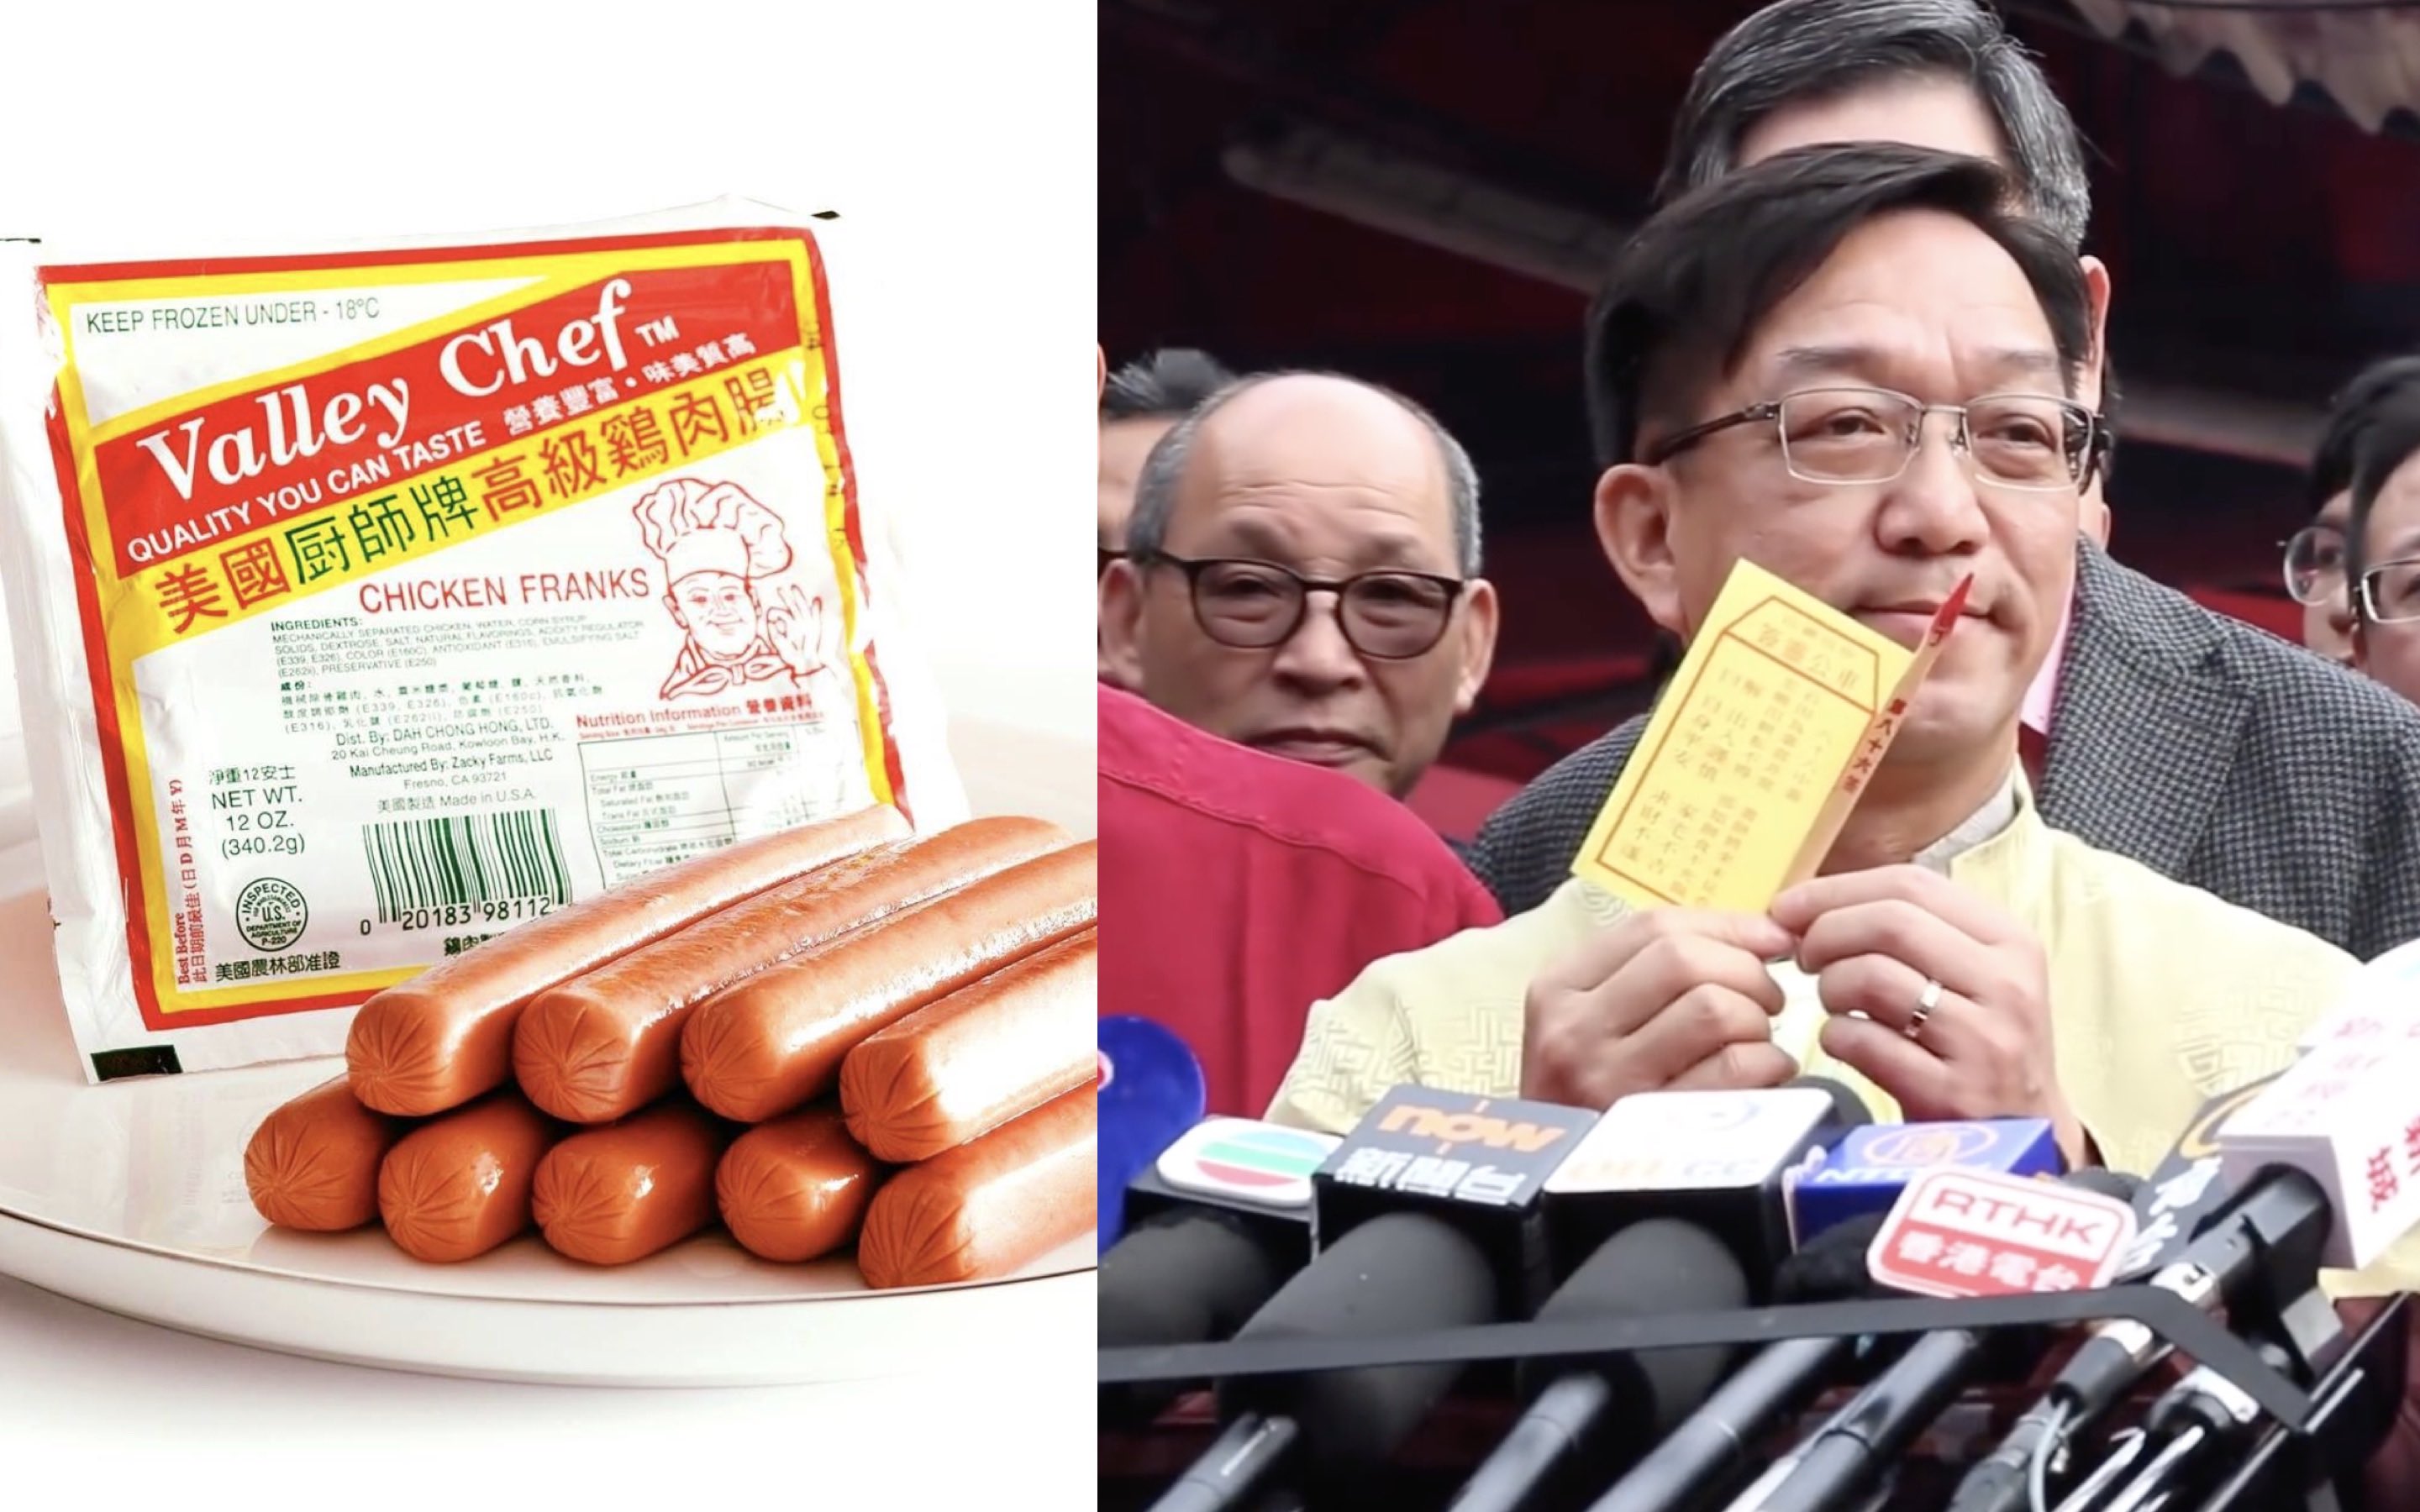 (Left) Valley Chef’s chicken frank sausages, a staple in most Hong Kong meals, were feared to disappear from supermarket shelves after the company that makes them filed for bankruptcy. (Right) Lawmaker Kenneth Lau holds up a fortune stick poem that appeared to suggest the trusty chicken frank would be saved. Photos and screengrabs via Facebook/DCH Valley Chef and YouTube.